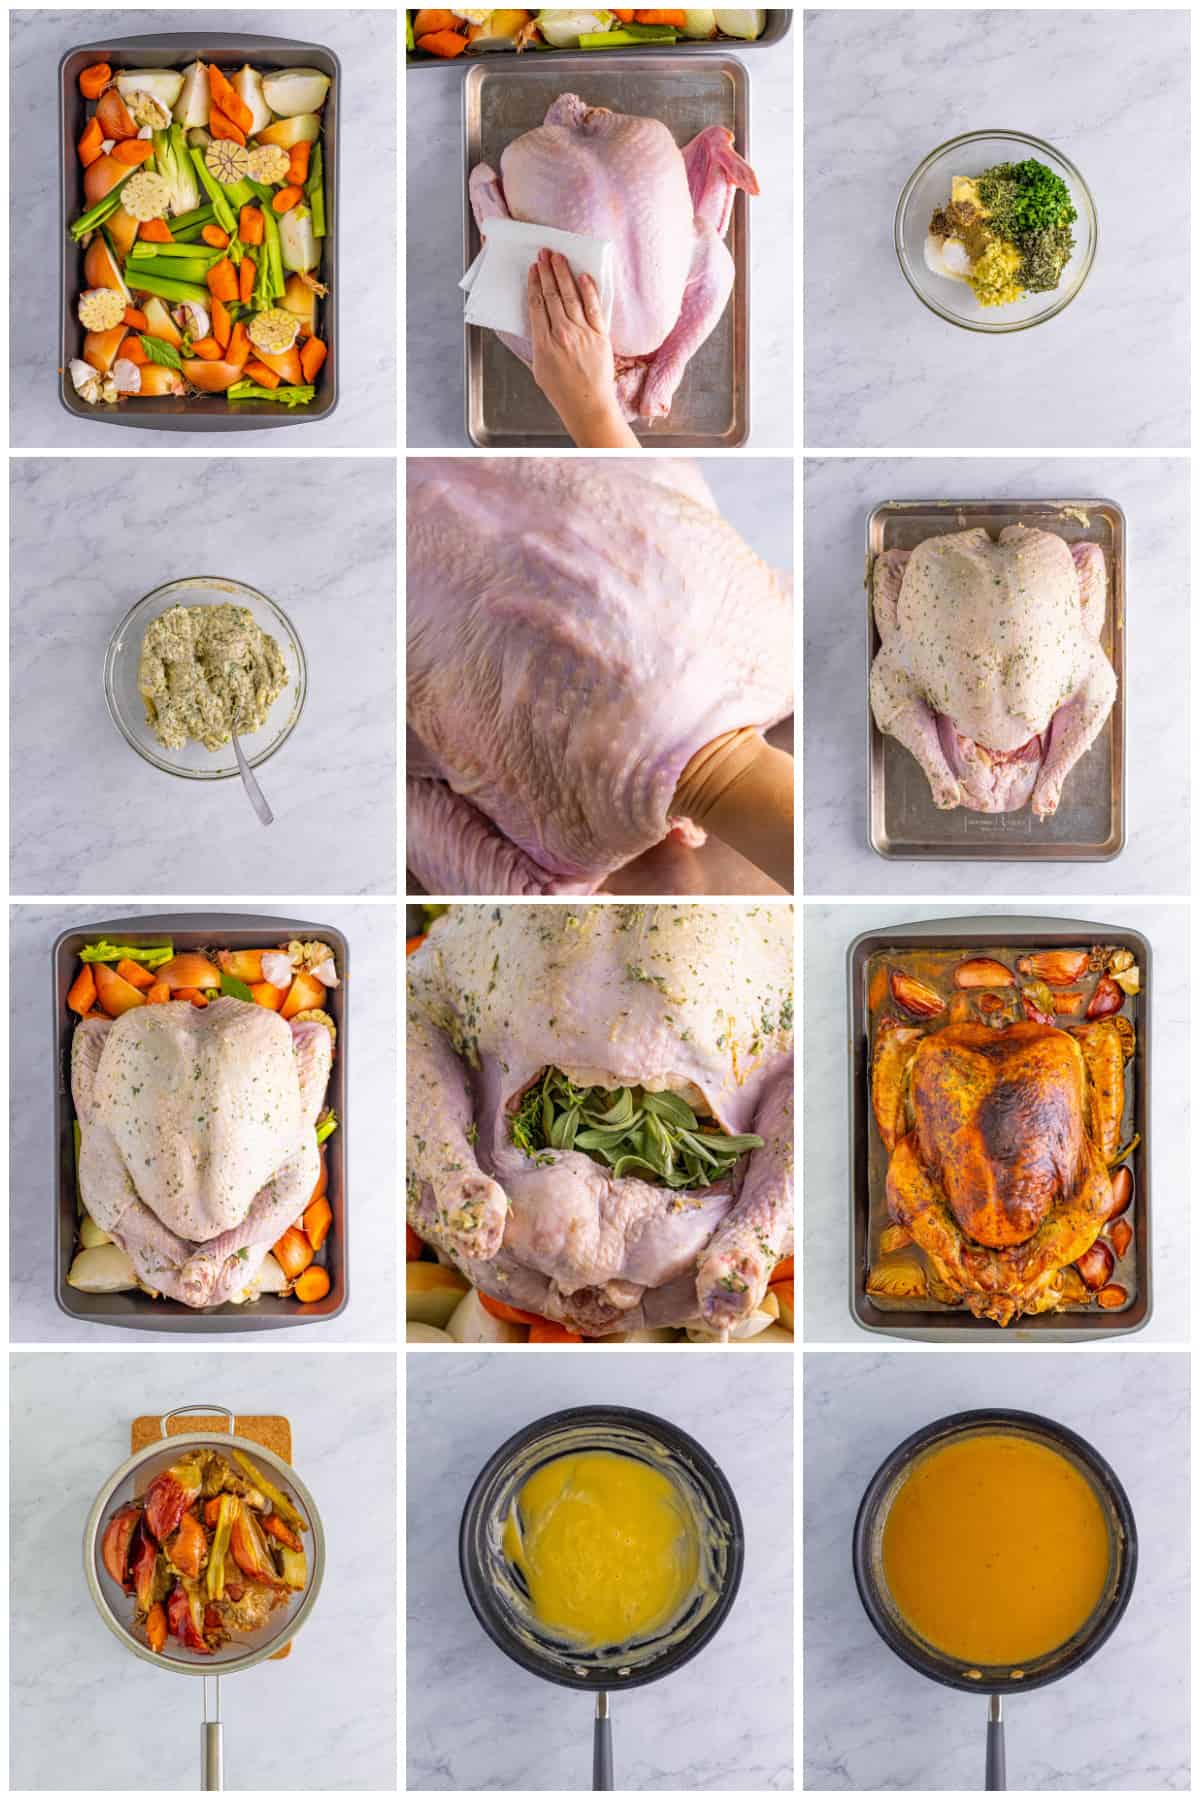 Step by step photos on how to make a Roasted Turkey Recipe.